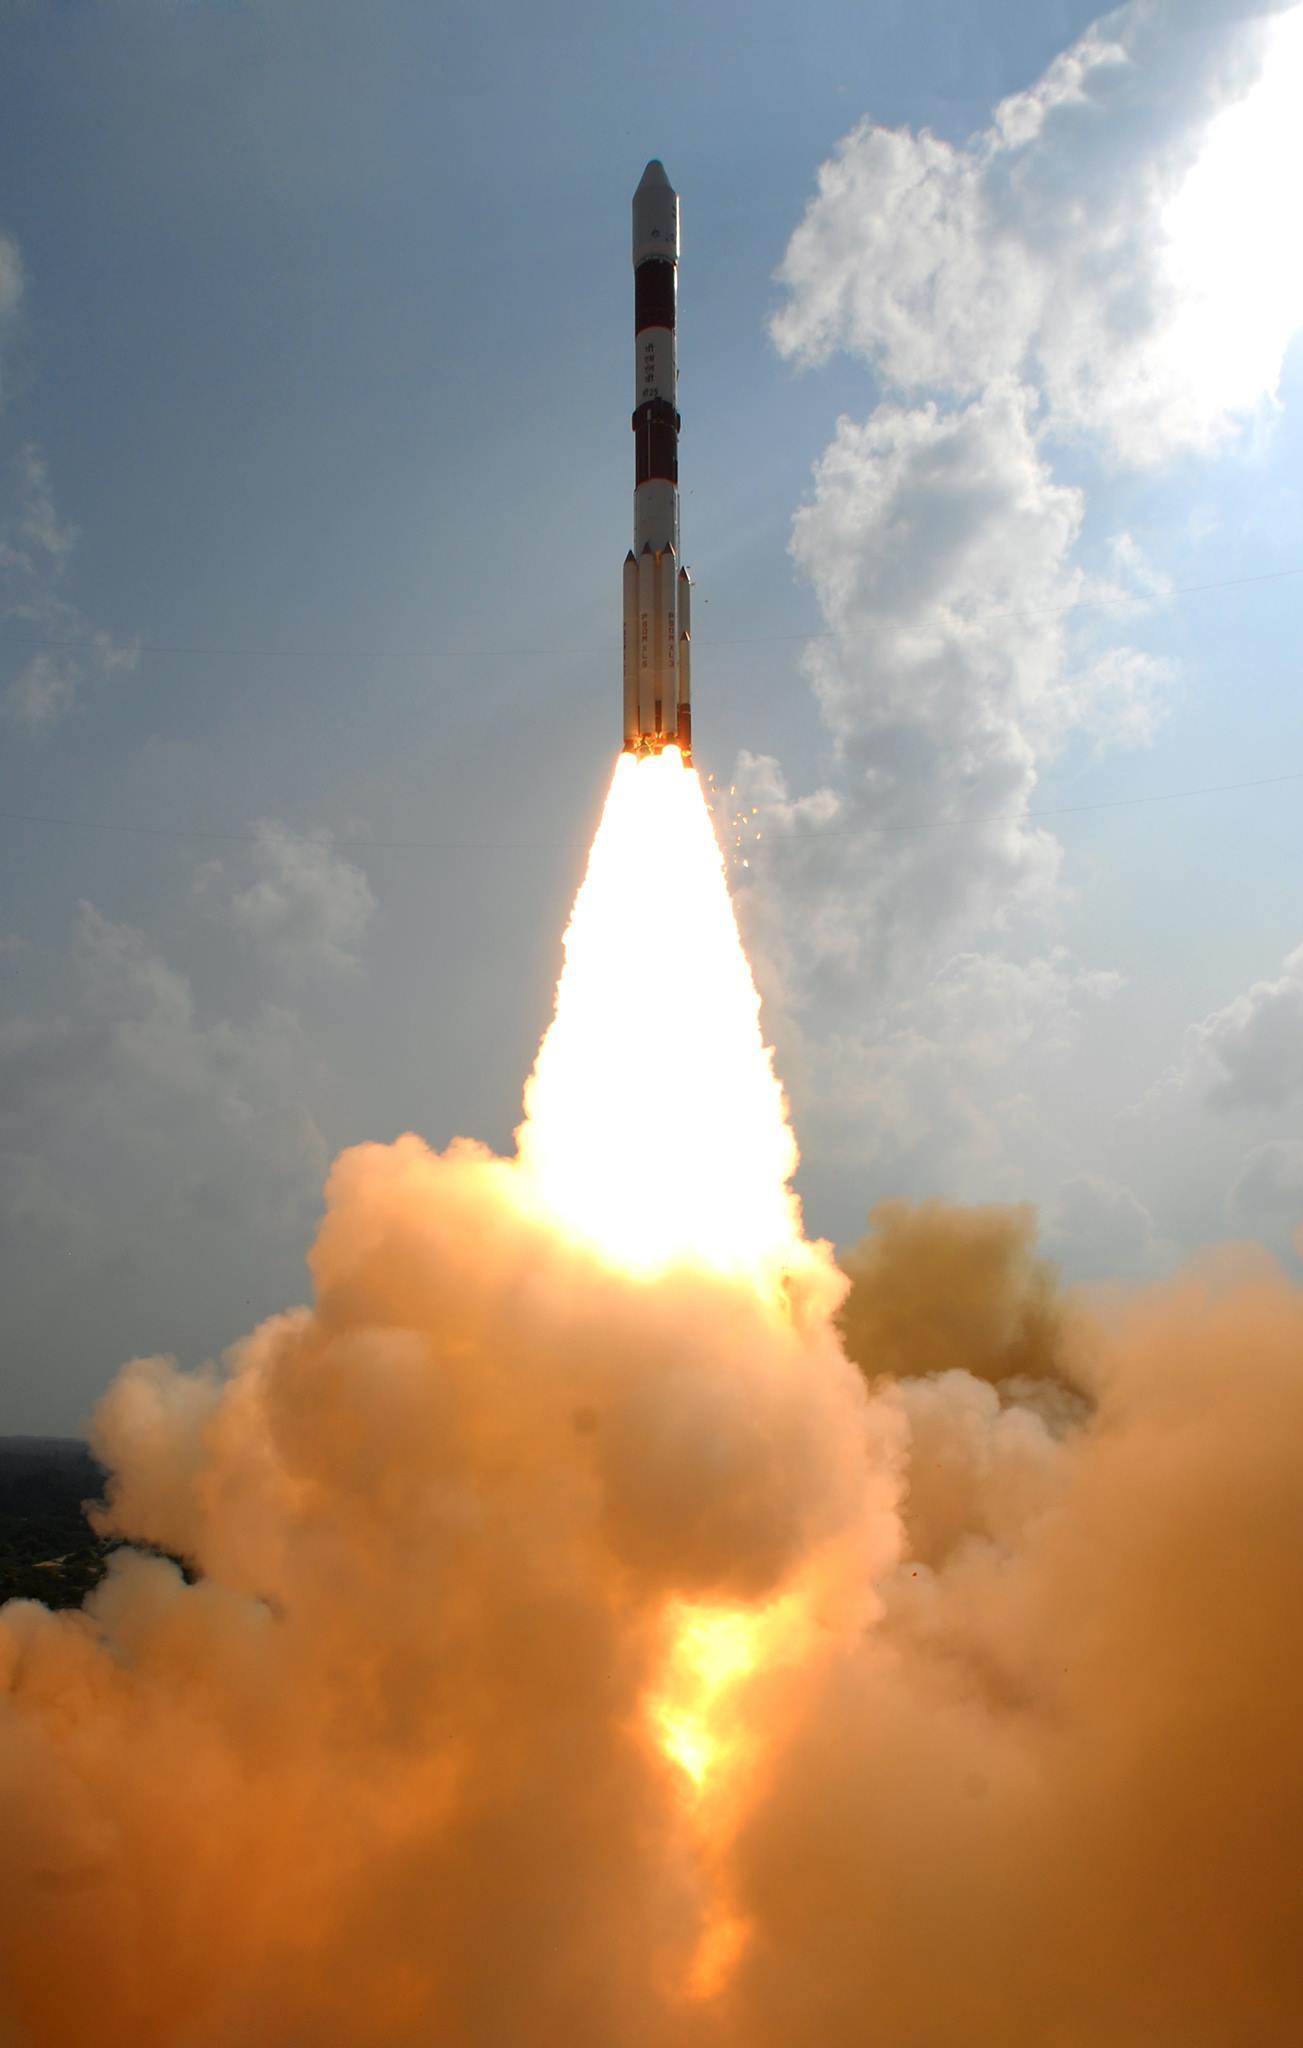 A picture-perfect launch for ISRO's Mars Orbiter Mission | The ...